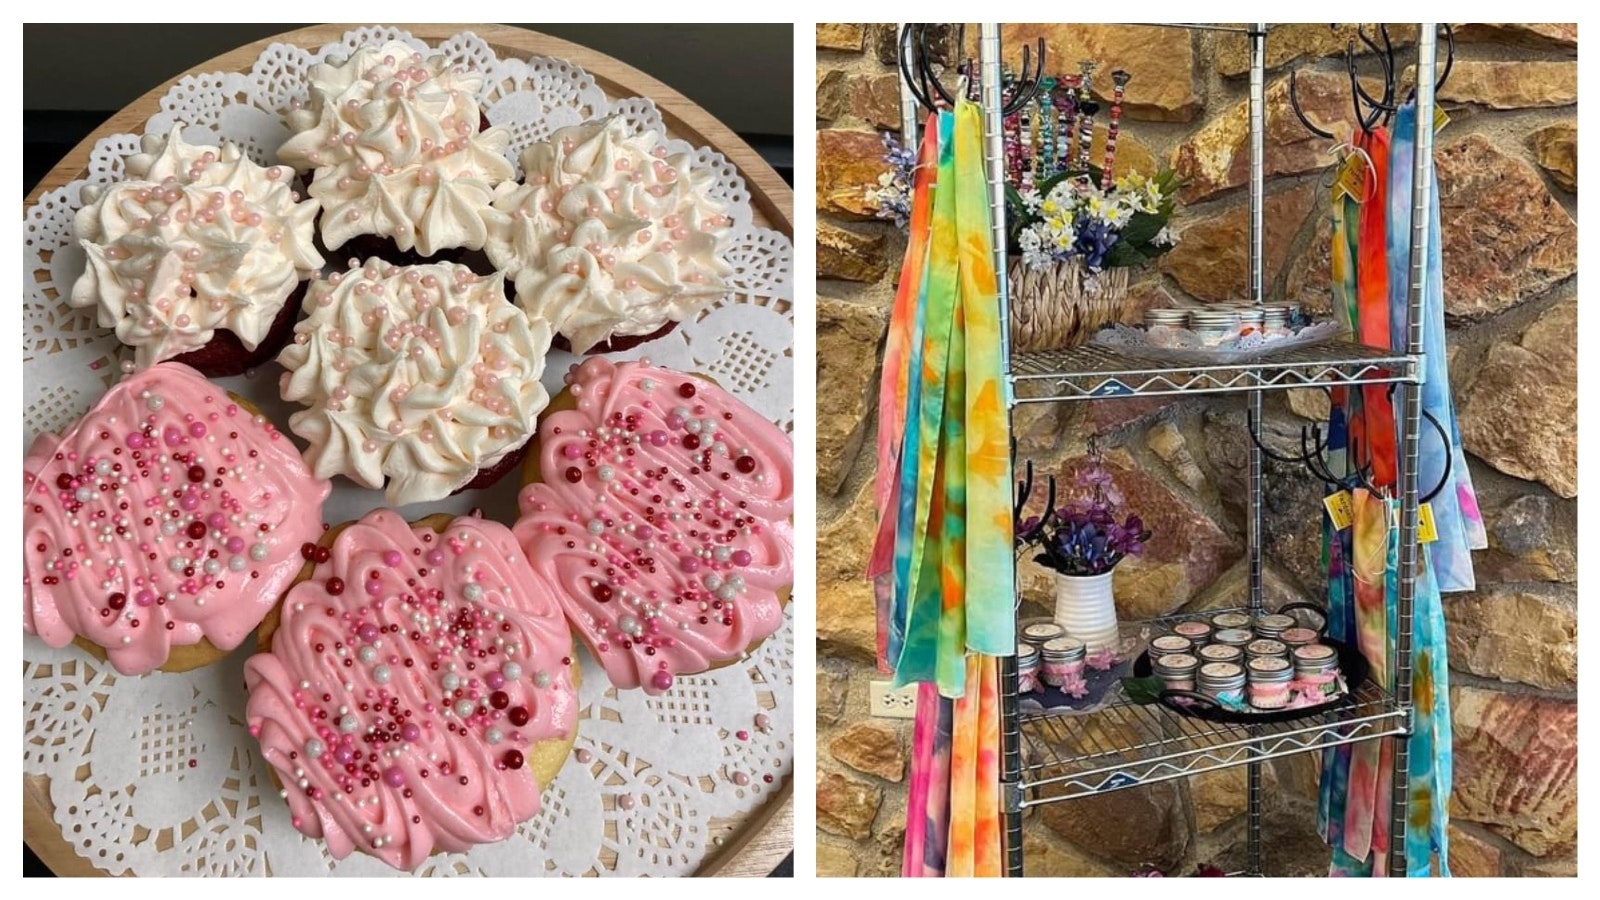 Cupcakes are an occasional offering at the cafe, left. The cafe also sells some handcrafted items like hand-dyed scarves and fairy wands.